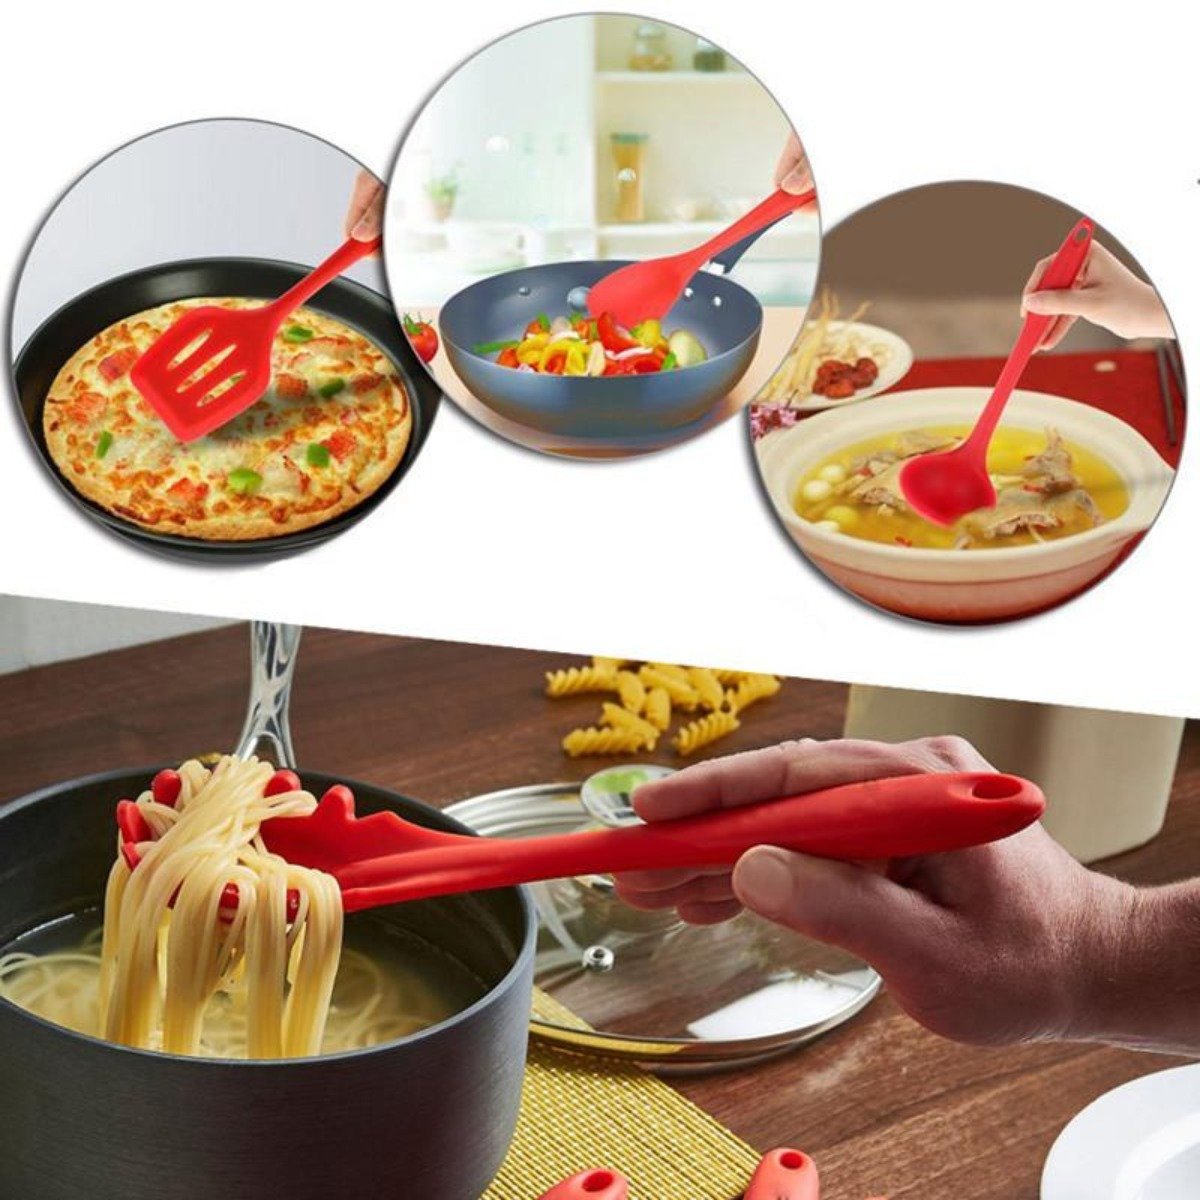 A set of Non Stick Silicone Cooking Utensils Premium Heat Resistant 10 PCS Set, including spatulas, spoons, tongs, and a whisk, arranged on a white background.